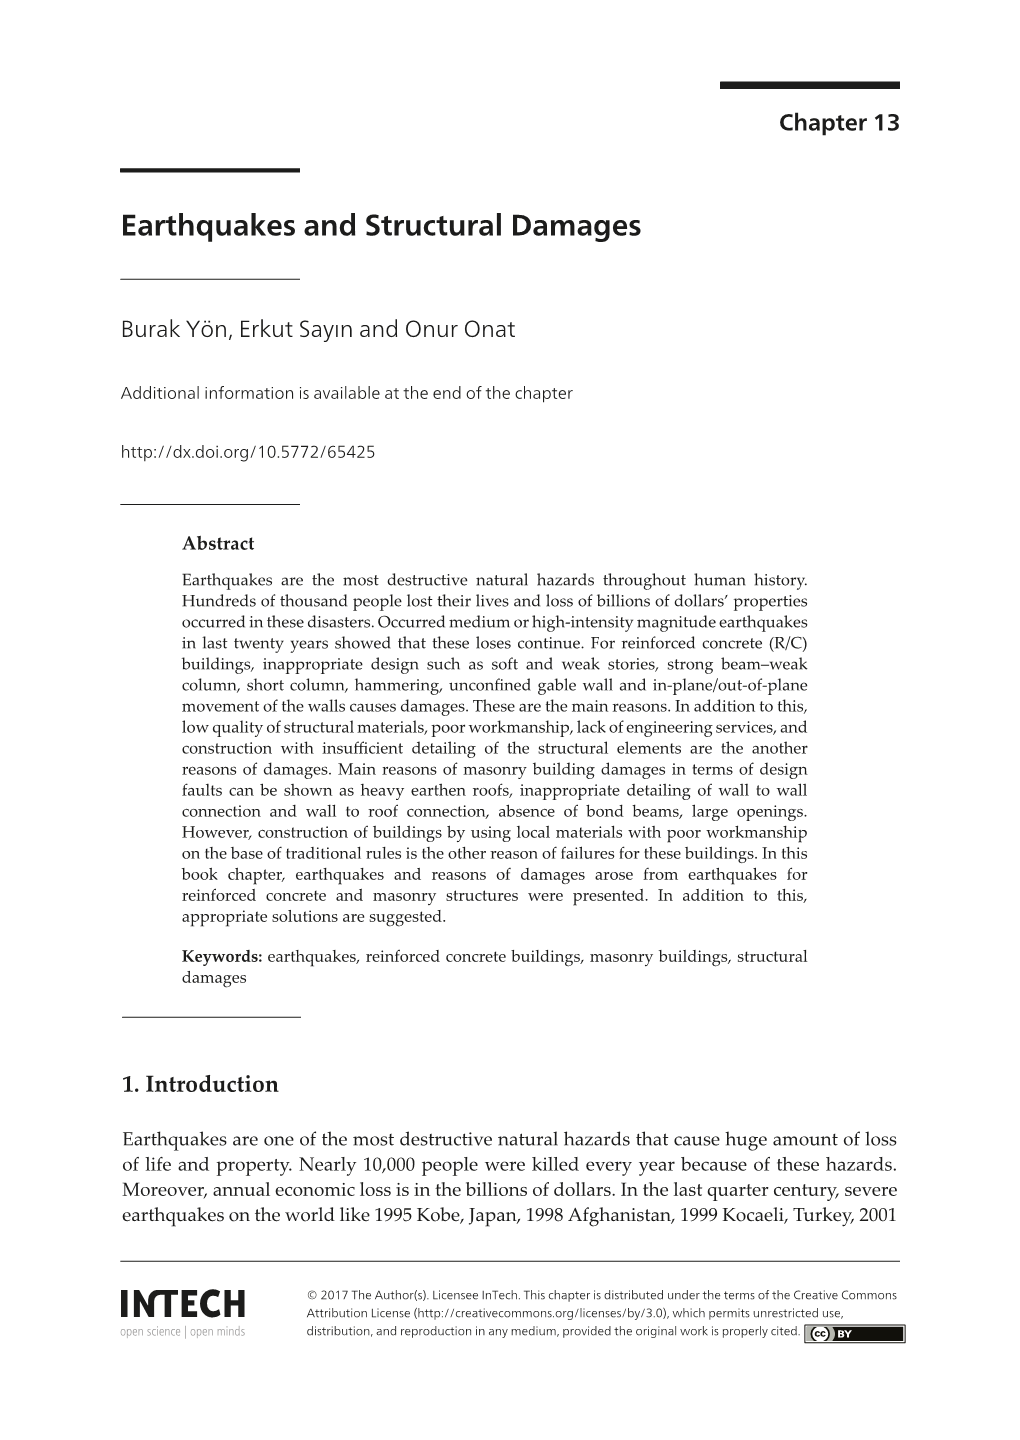 Earthquakes and Structural Damages